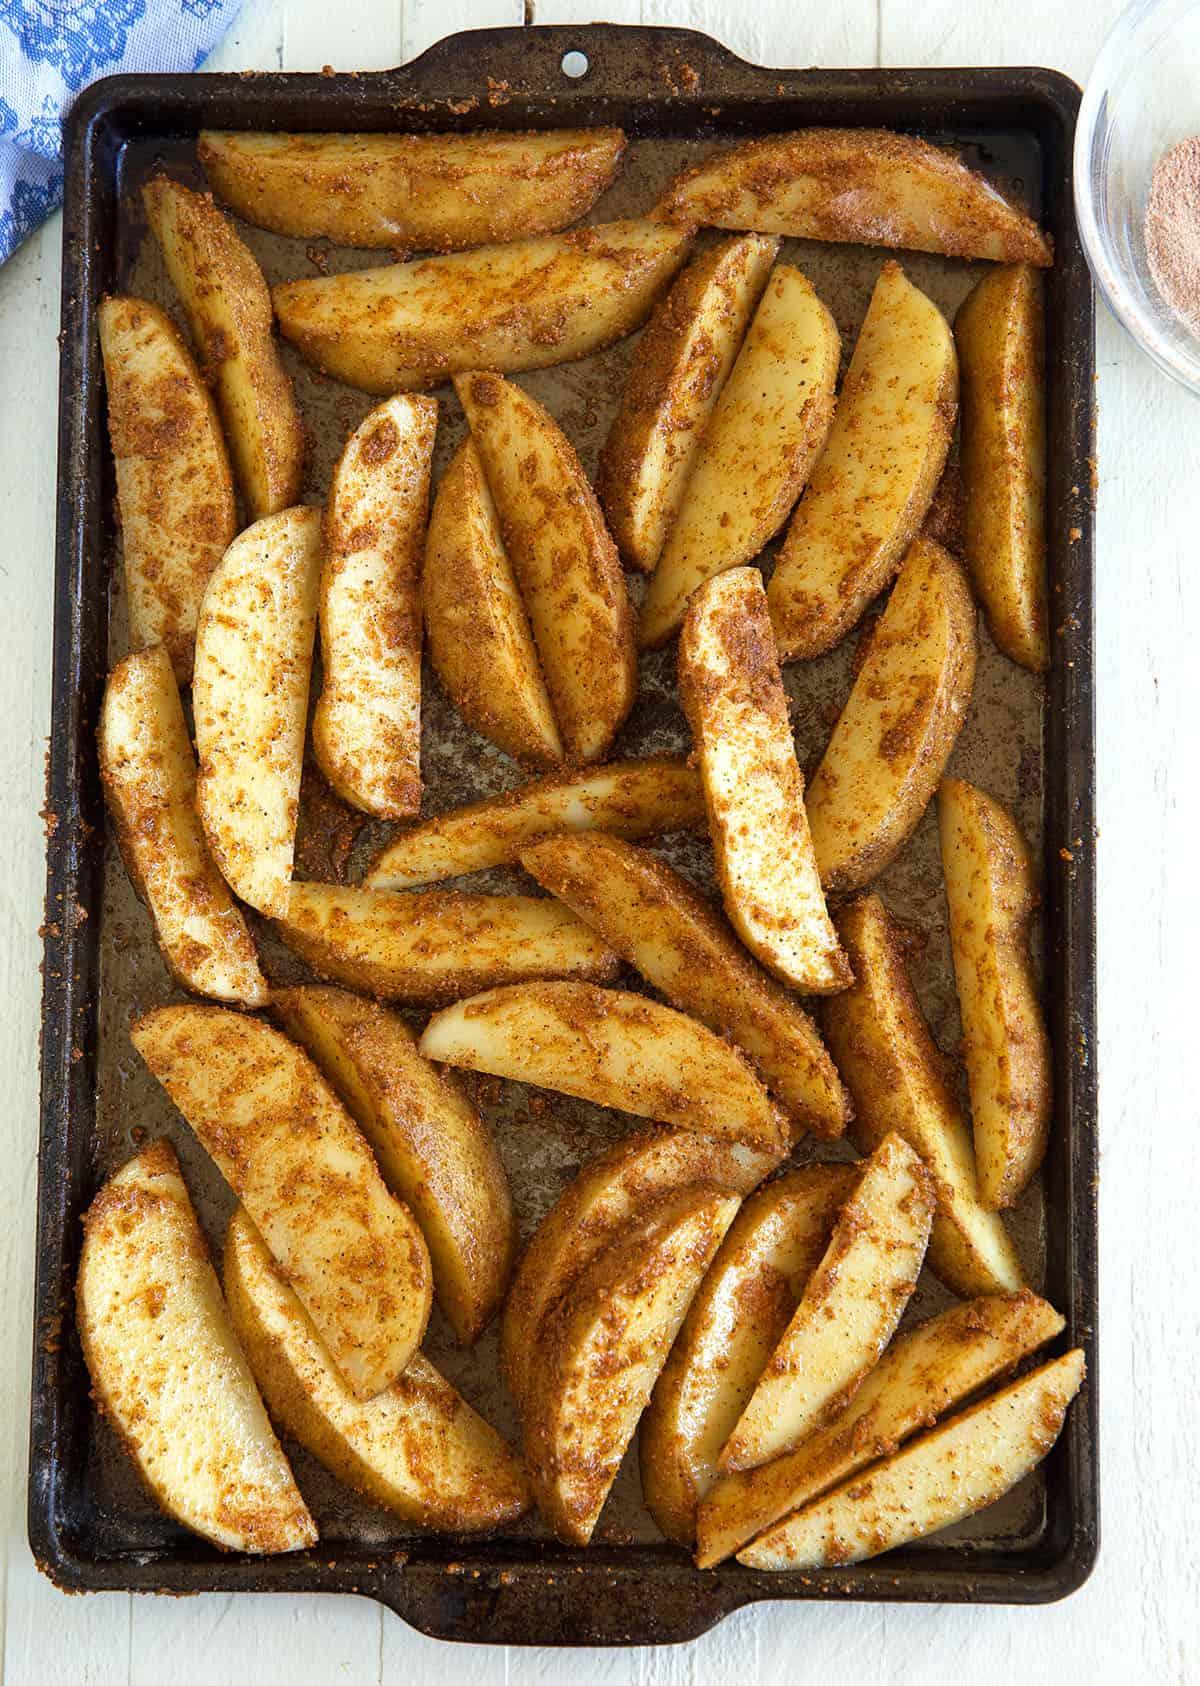 Seasoned, uncooked wedges are spread in a single layer on a baking sheet.